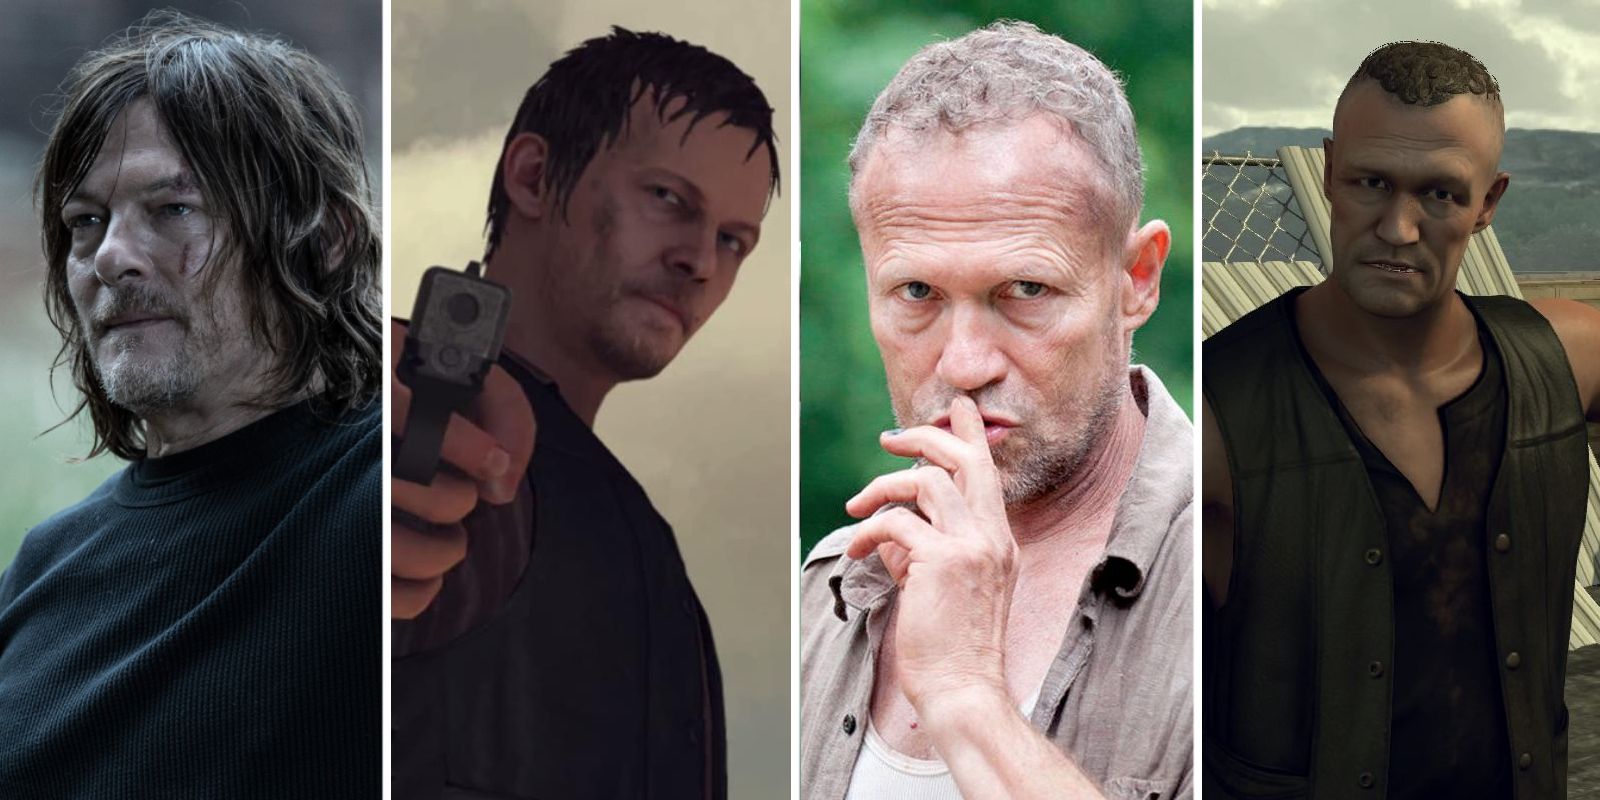 Norman Reedus and Michael Rooker in The Walking Dead as well as their reprisals in The Walking Dead: Survival Instinct